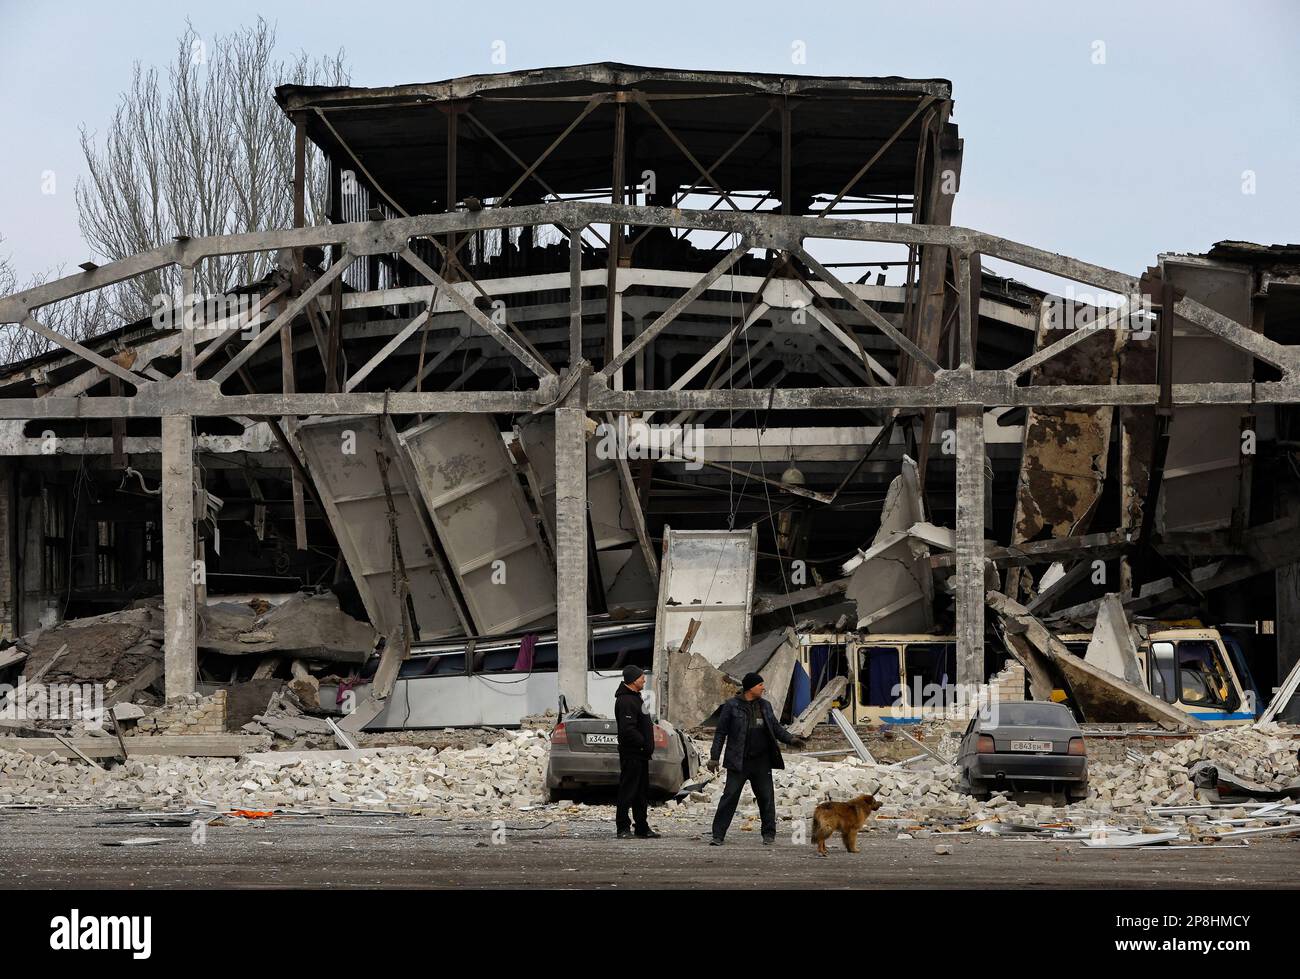 Men stand outside a bus depot damaged by recent shelling in the course of Russia-Ukraine conflict, in the town of Volnovakha in the Donetsk region, Russian-controlled Ukraine, March 9, 2023. REUTERS/Alexander Ermochenko Stock Photo